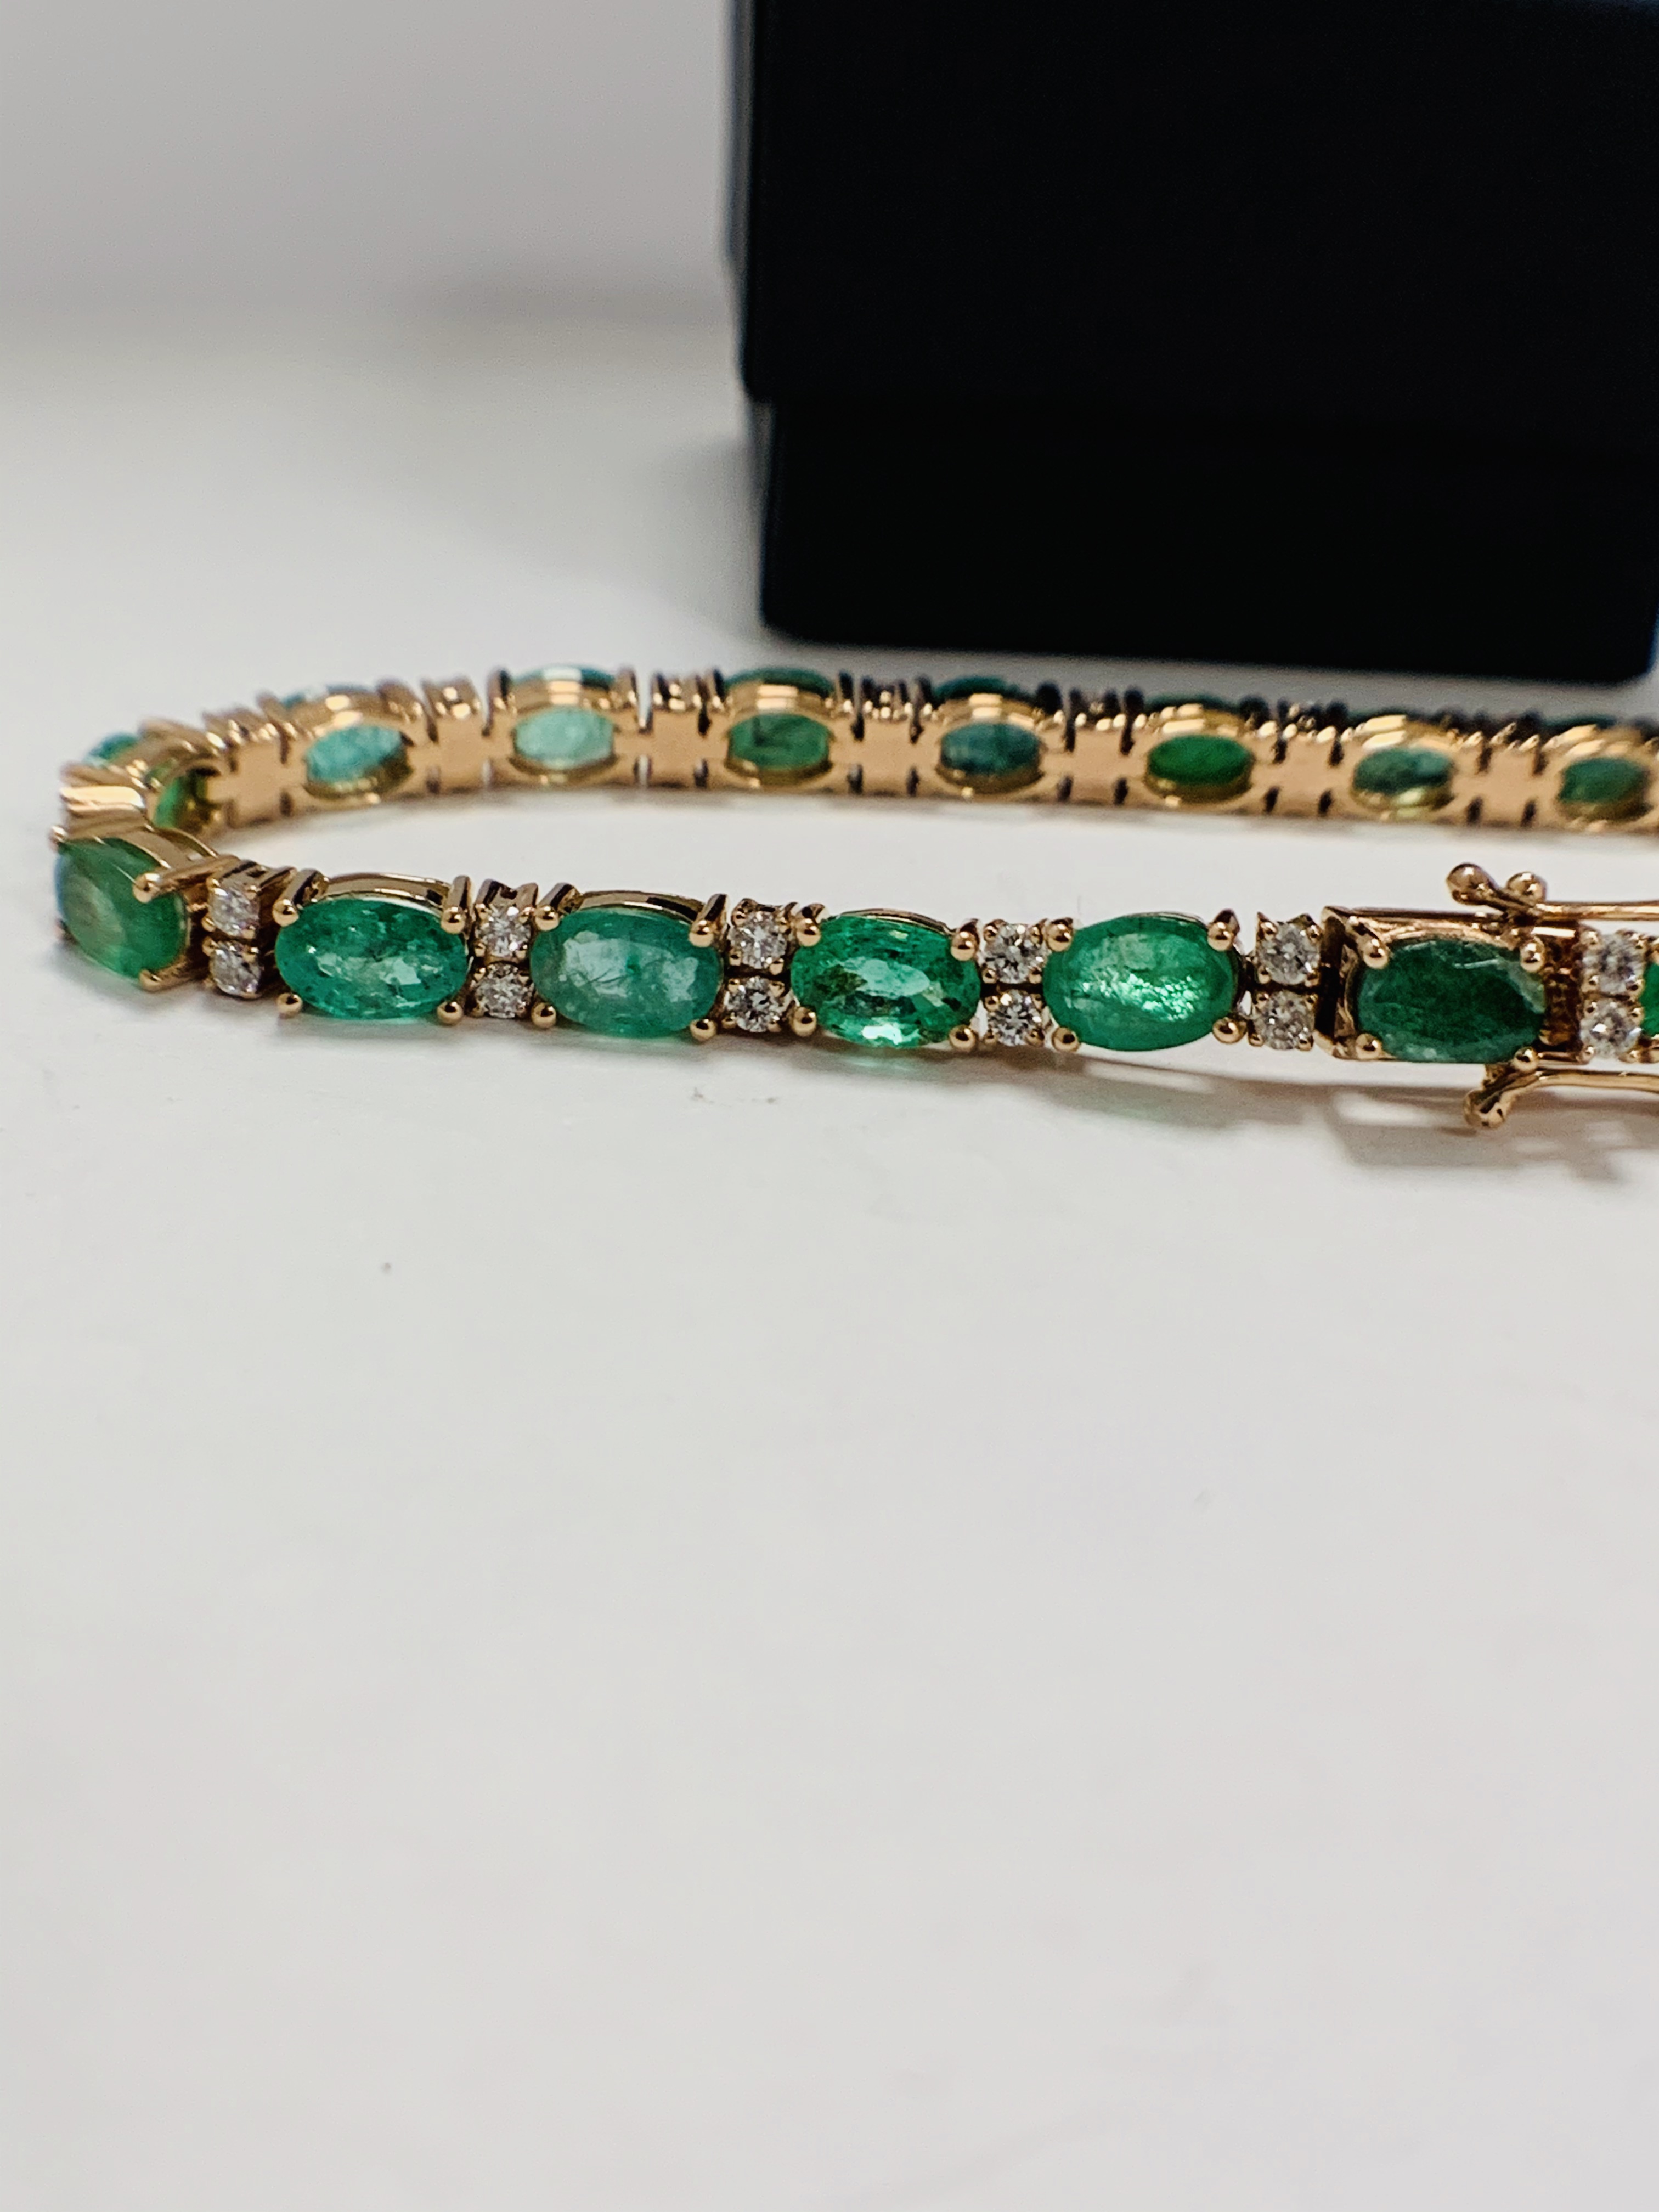 14ct Rose Gold Emerald and Diamond bracelet featuring, 21 oval cut, light green Emeralds (9.03ct TSW - Image 2 of 19